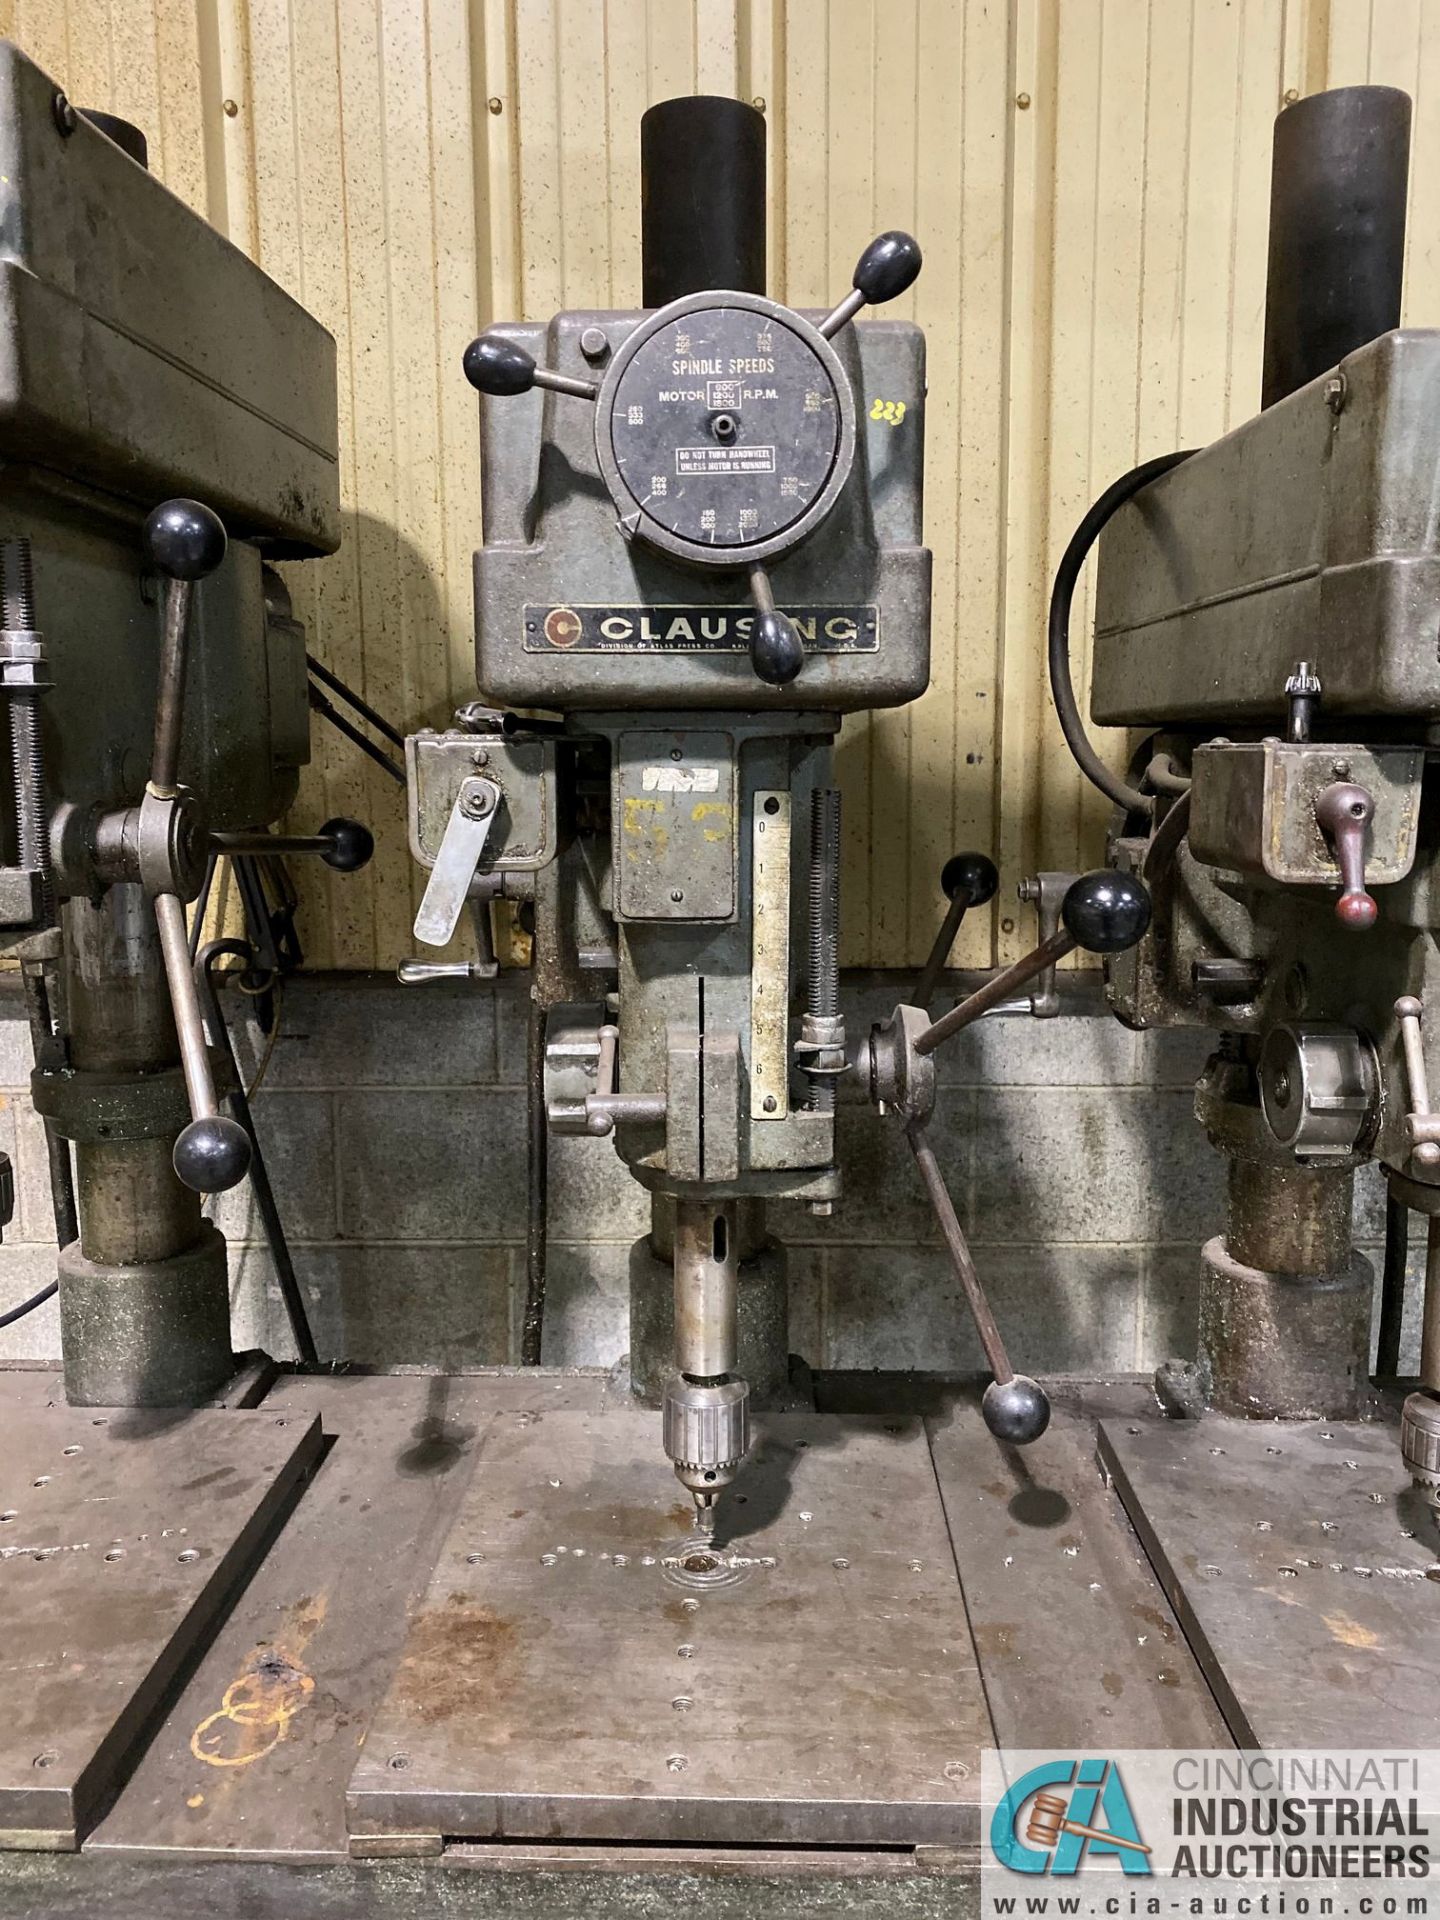 18" - 20" 4-HEAD CLAUSING DRILL PRESS, SPINDLE SPEED 150-2000 RPM - Image 5 of 7